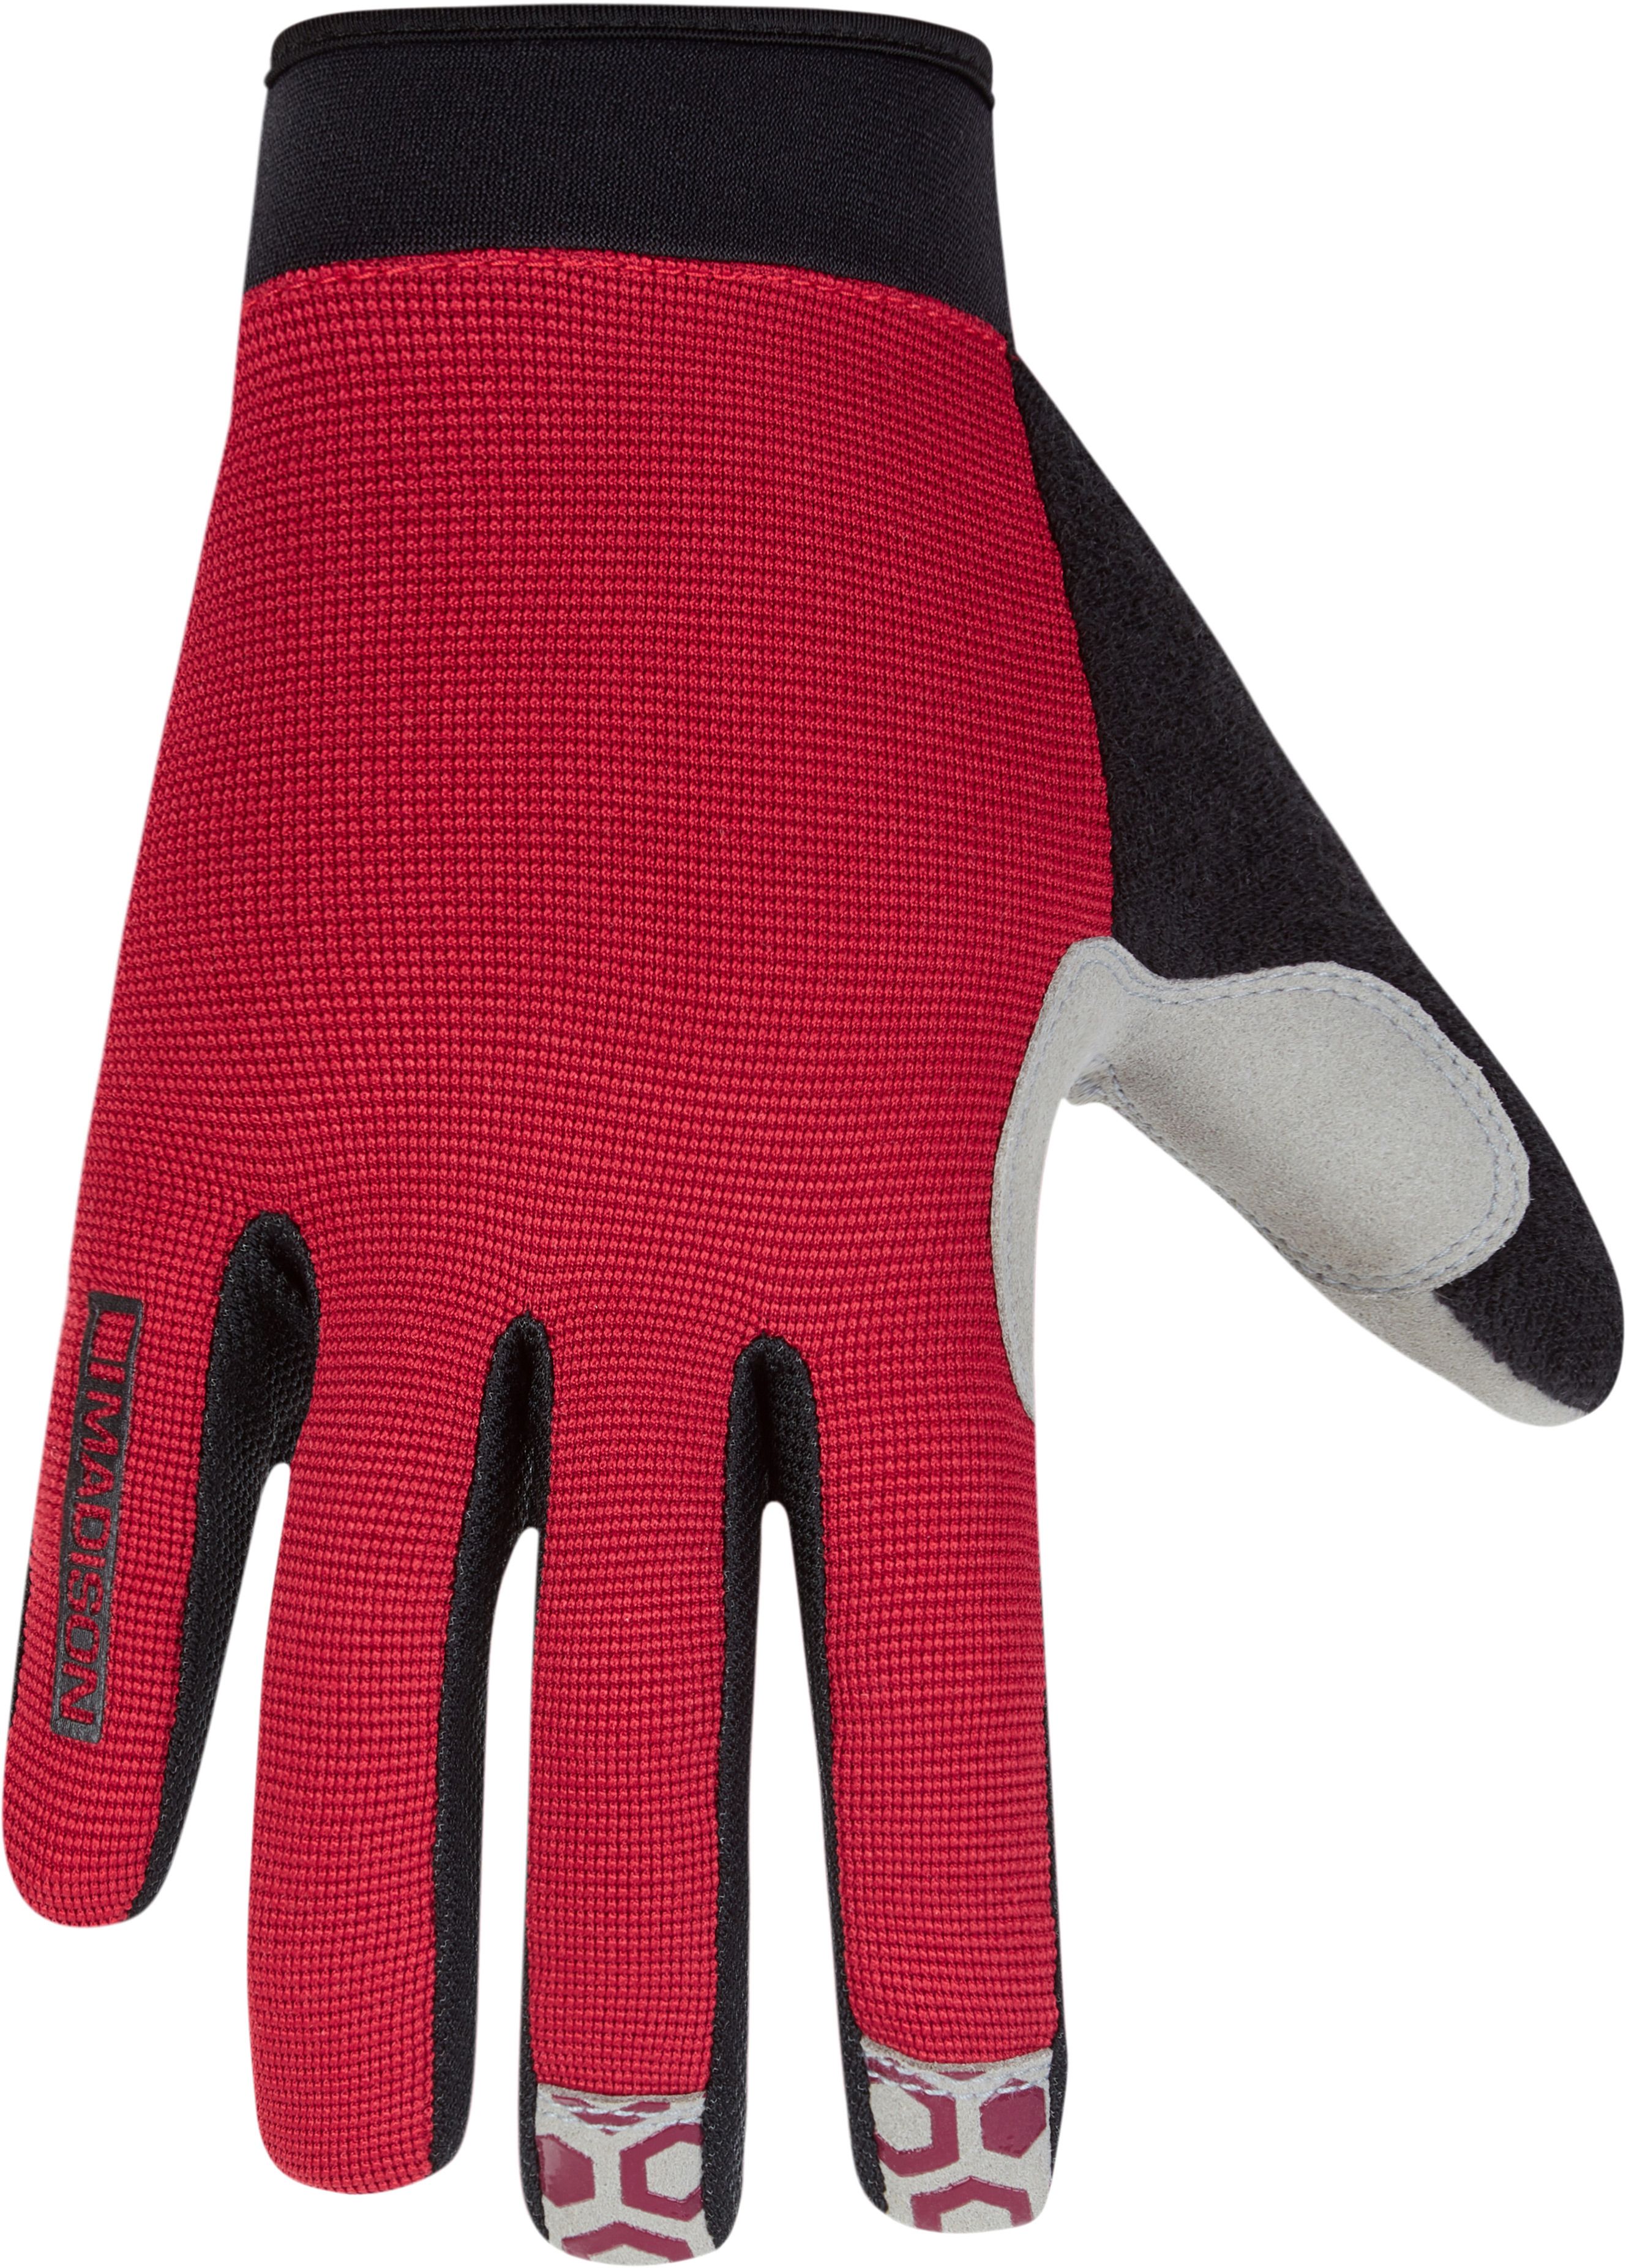 Madison Roam Gloves £13.99 Gloves General Road/XC/Trail Cyclestore